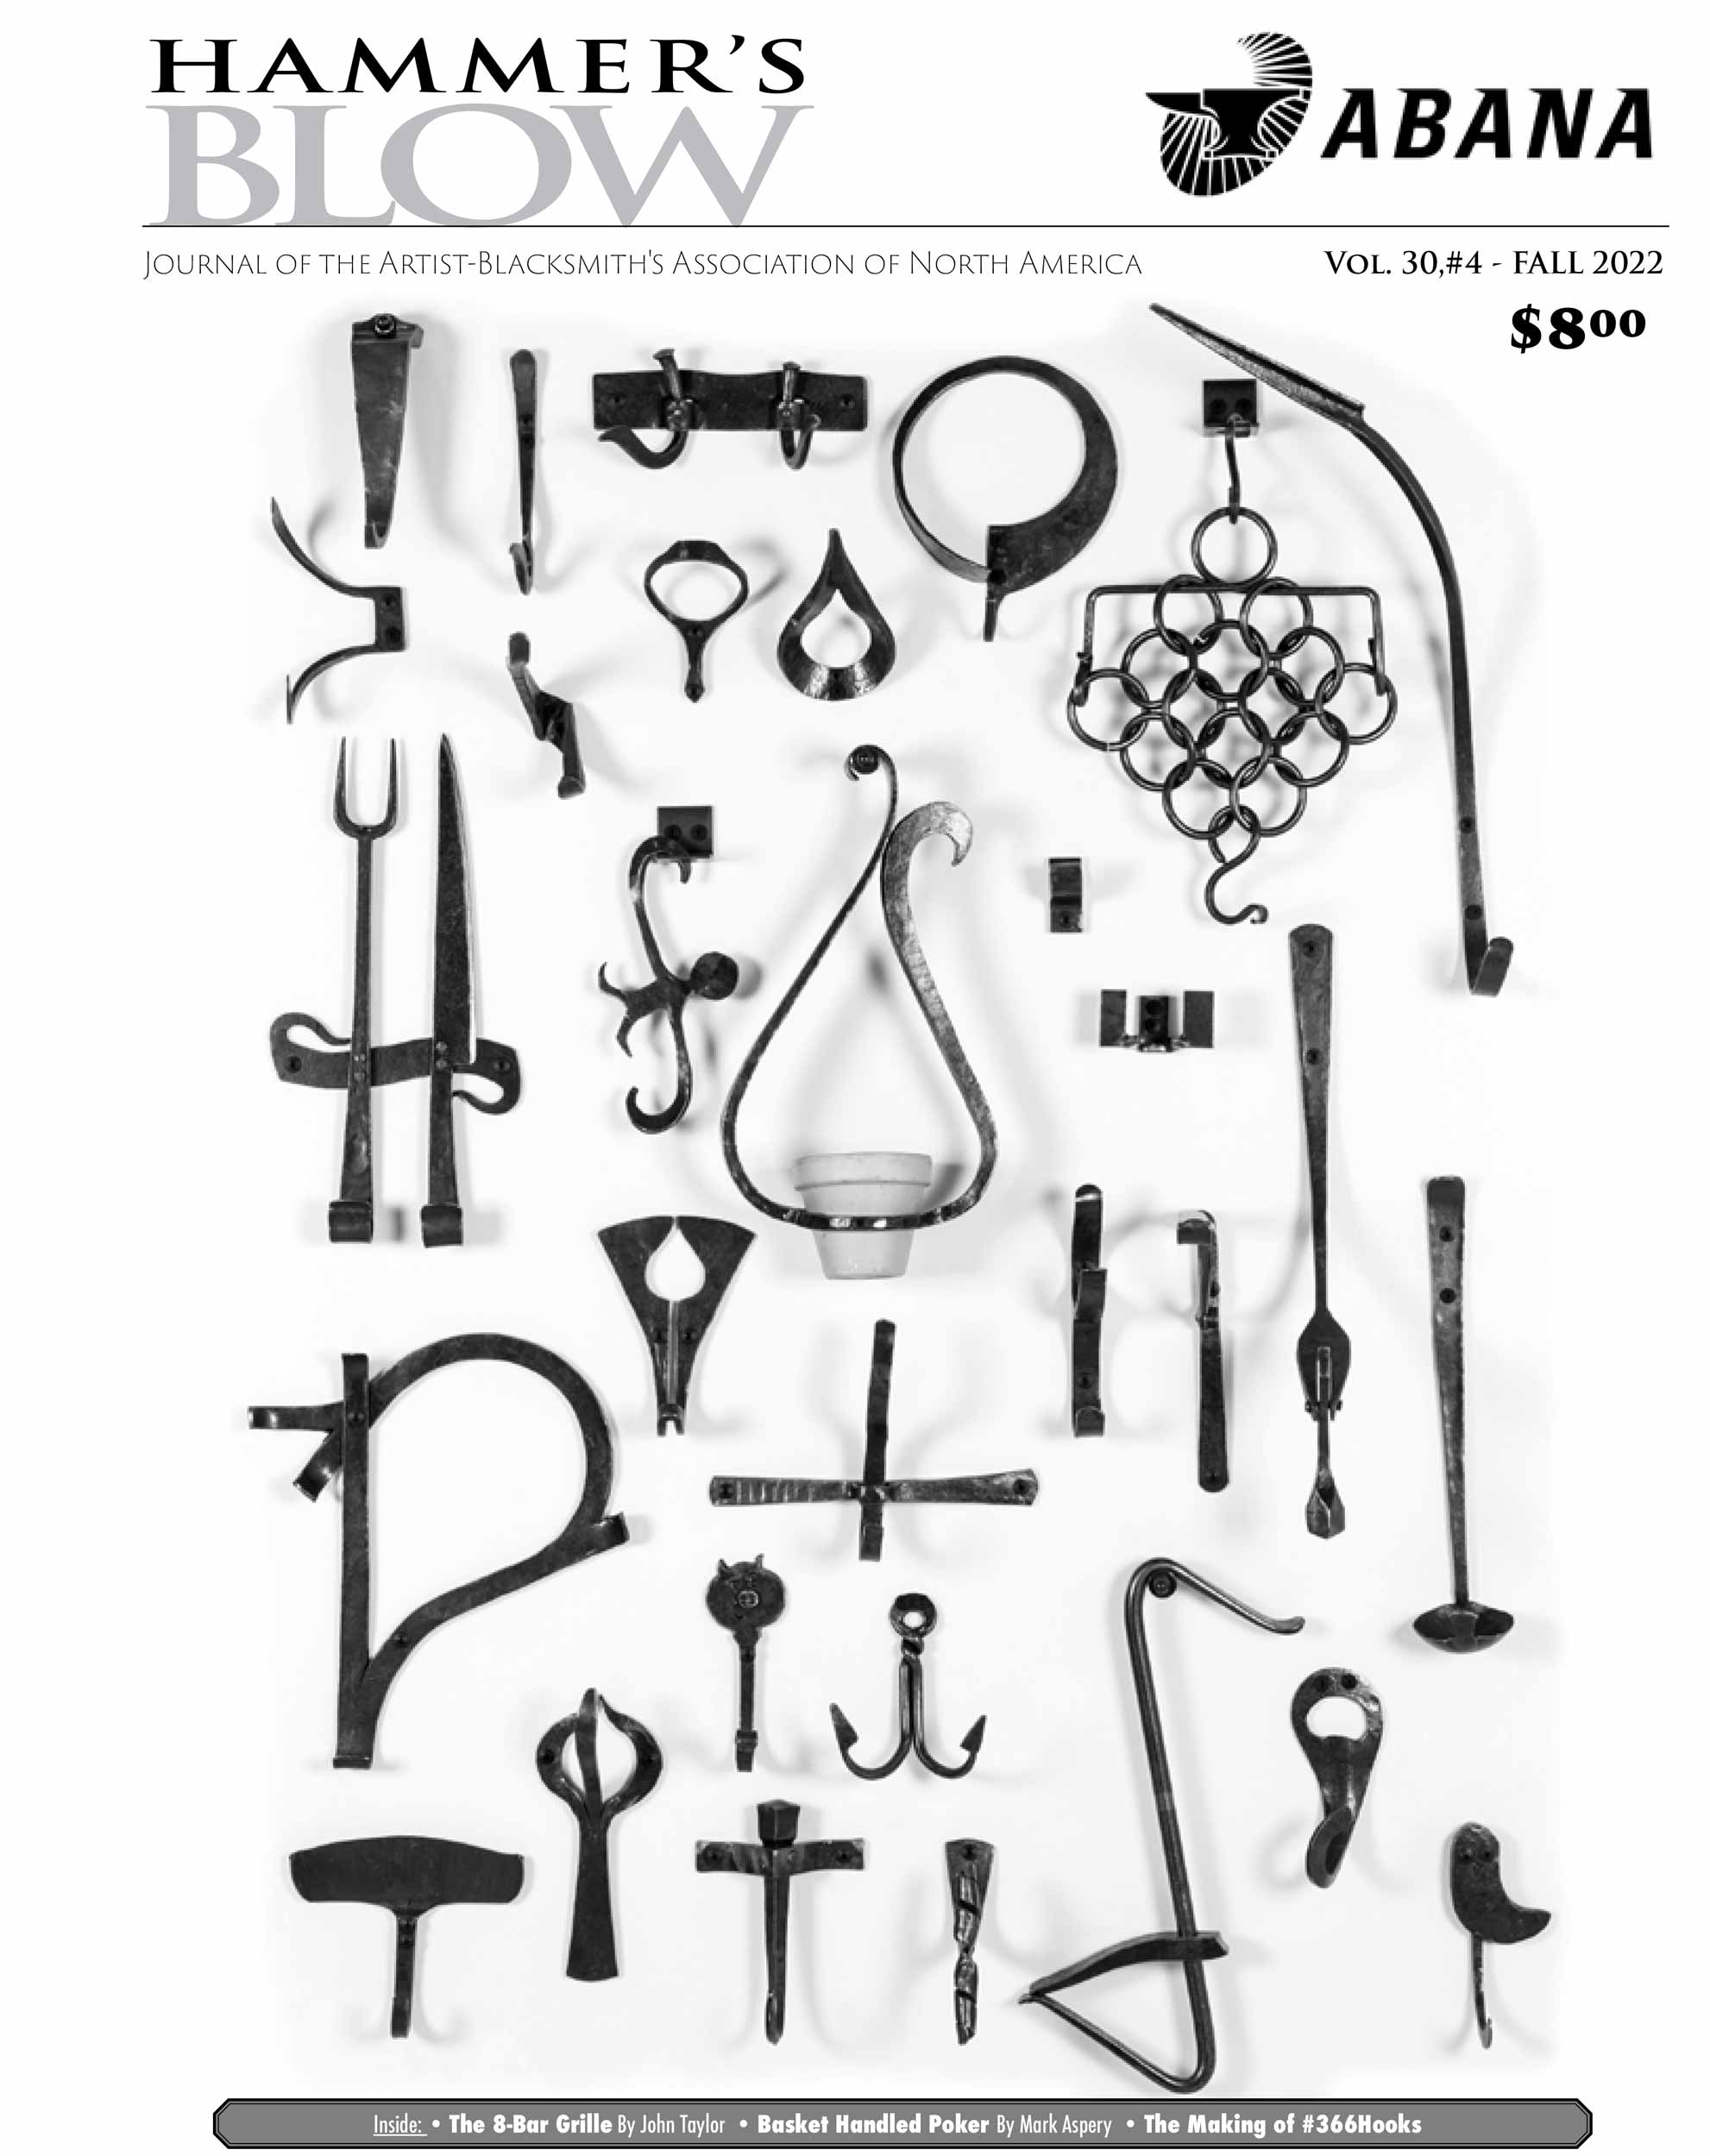 Cover image of the Fall 2022 issue of Hammer's Blow, a how-to journal from the Artist-Blacksmith's Association of North America.